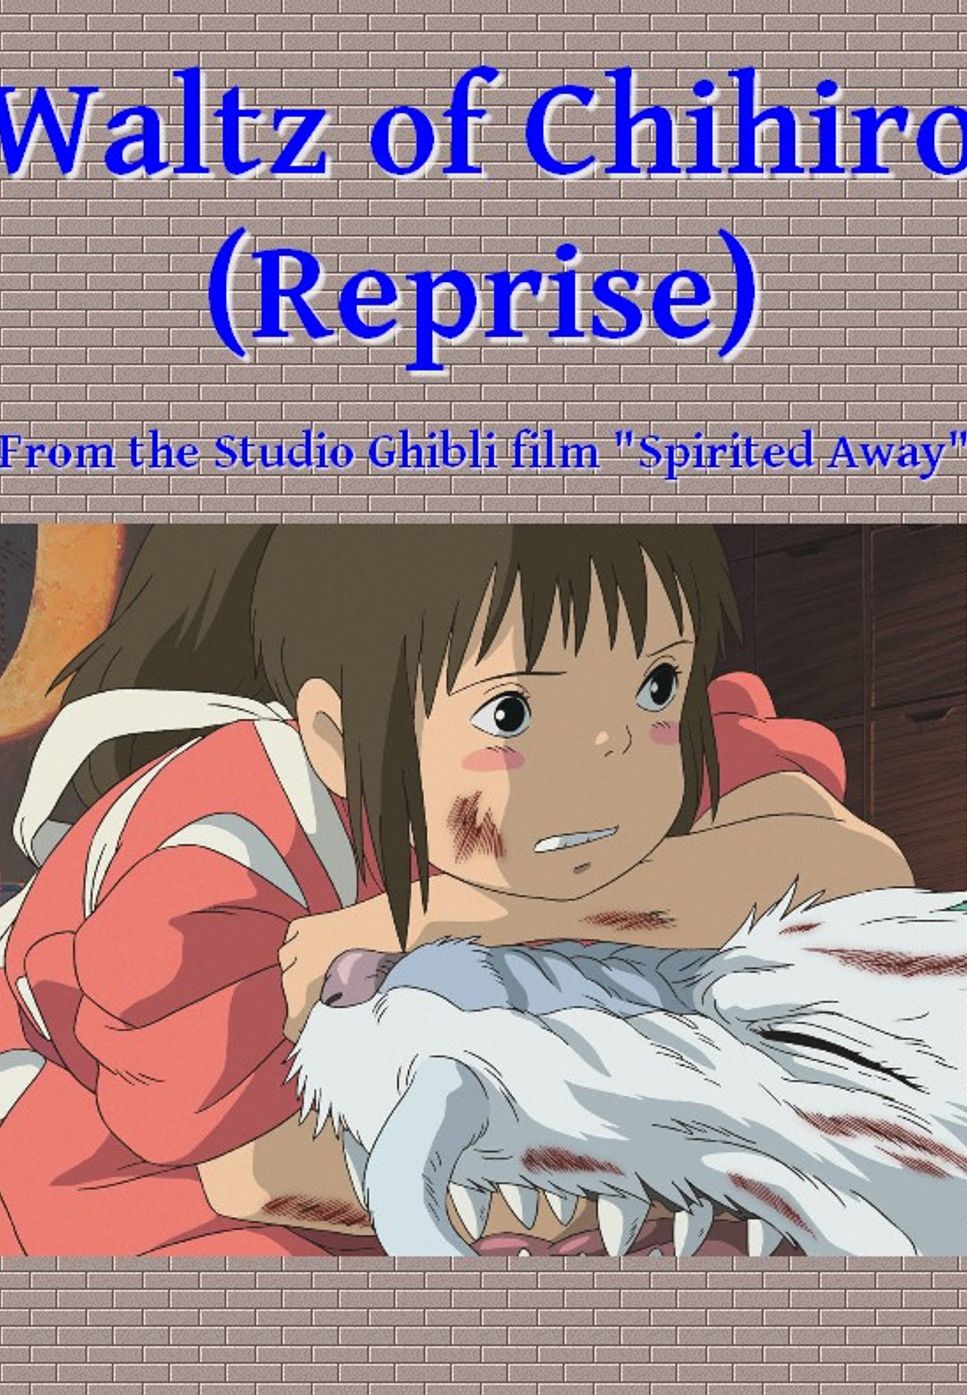 Spirited Away - Waltz of Chihiro (Reprise) (Piano Solo) by O. Guy Morley